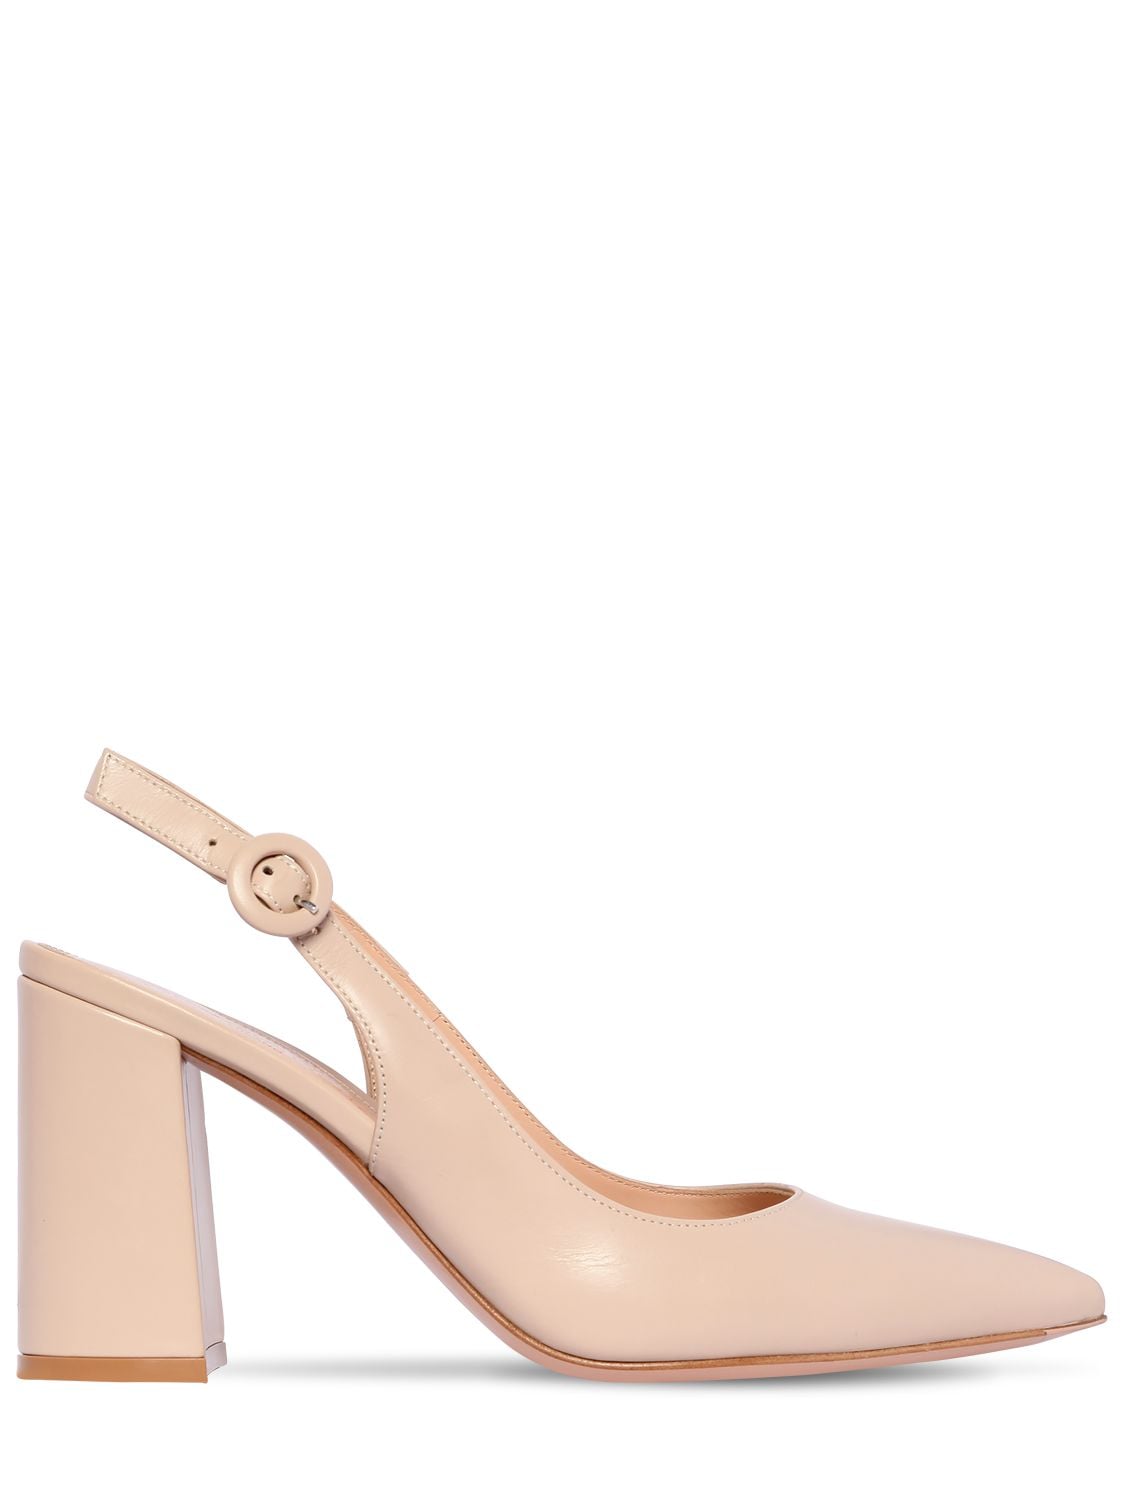 Gianvito Rossi 85mm Leather Sling Back Pumps In Nude